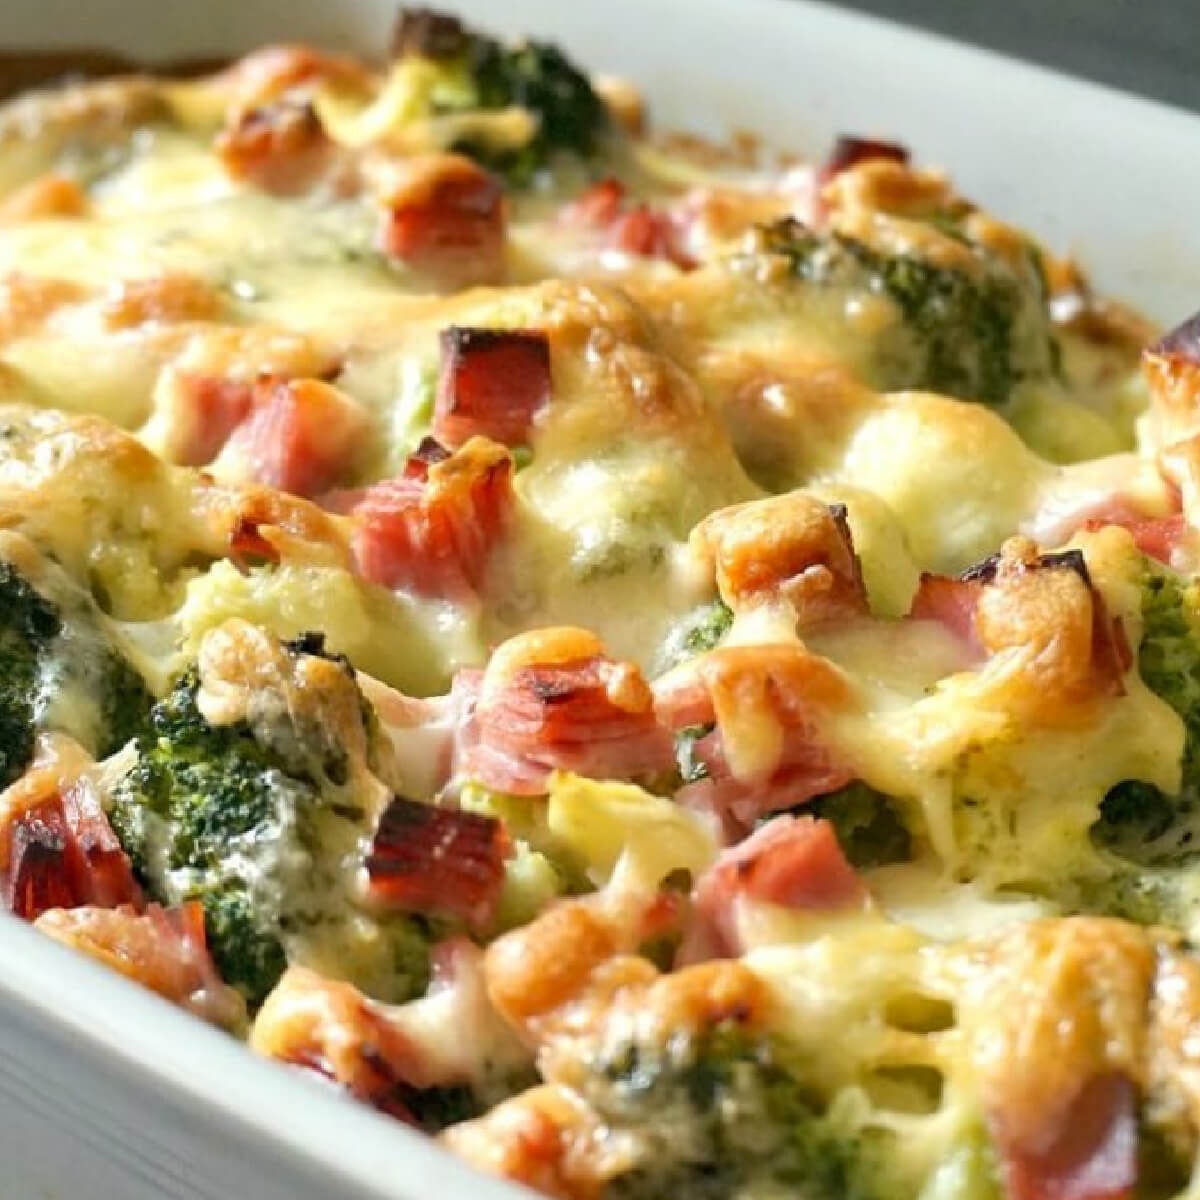 A dish with ham and broccoli bake